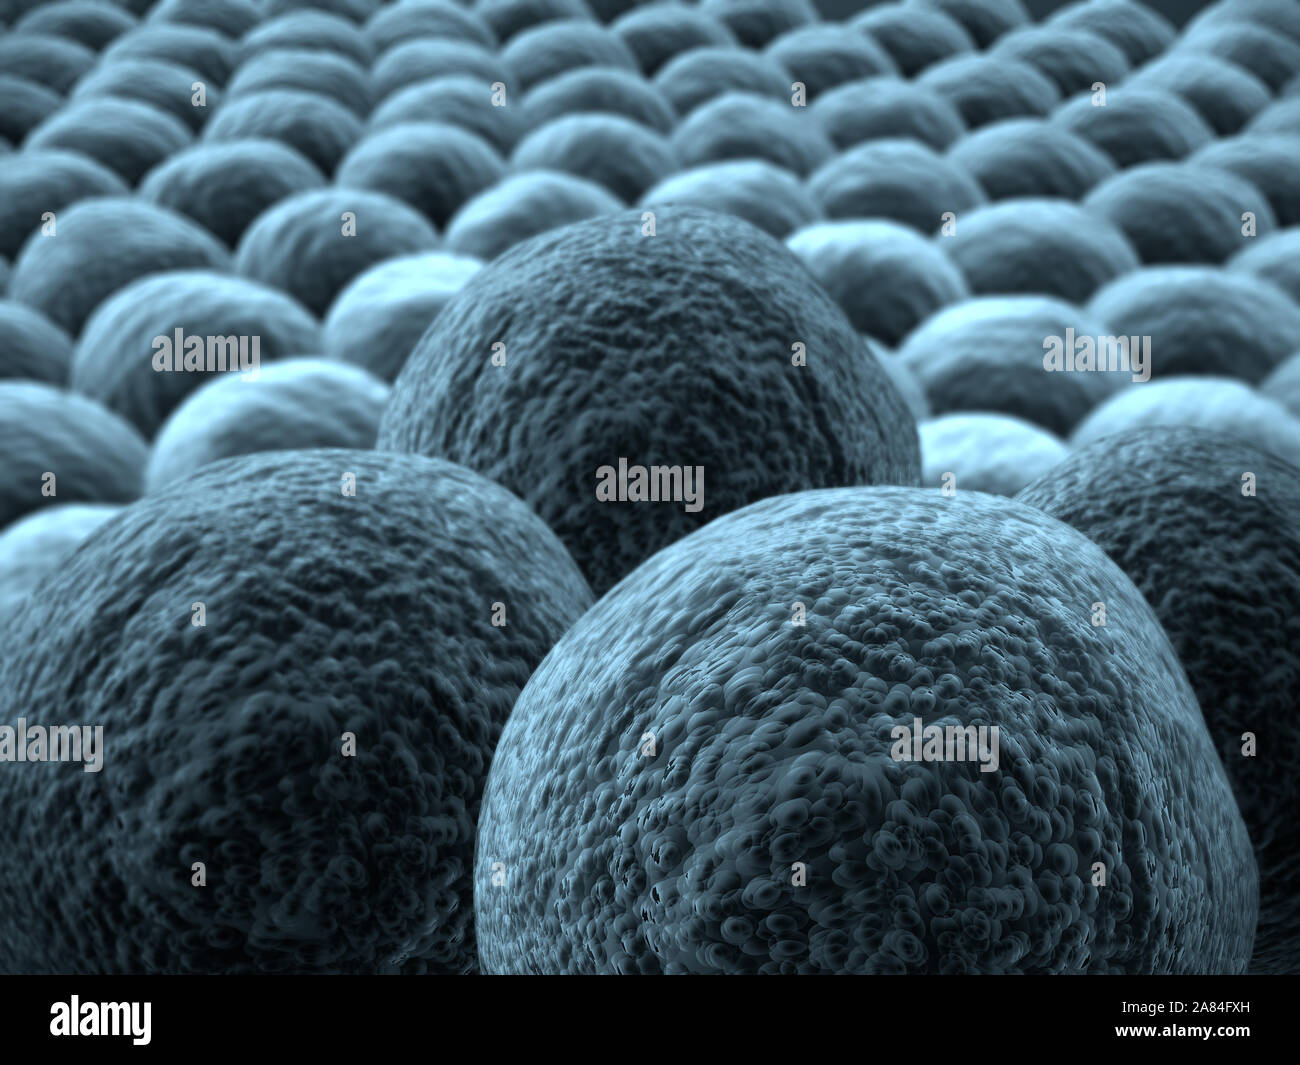 image of cancer cells, 3d rendered cancer cell, Clusters of infected cells Stock Photo